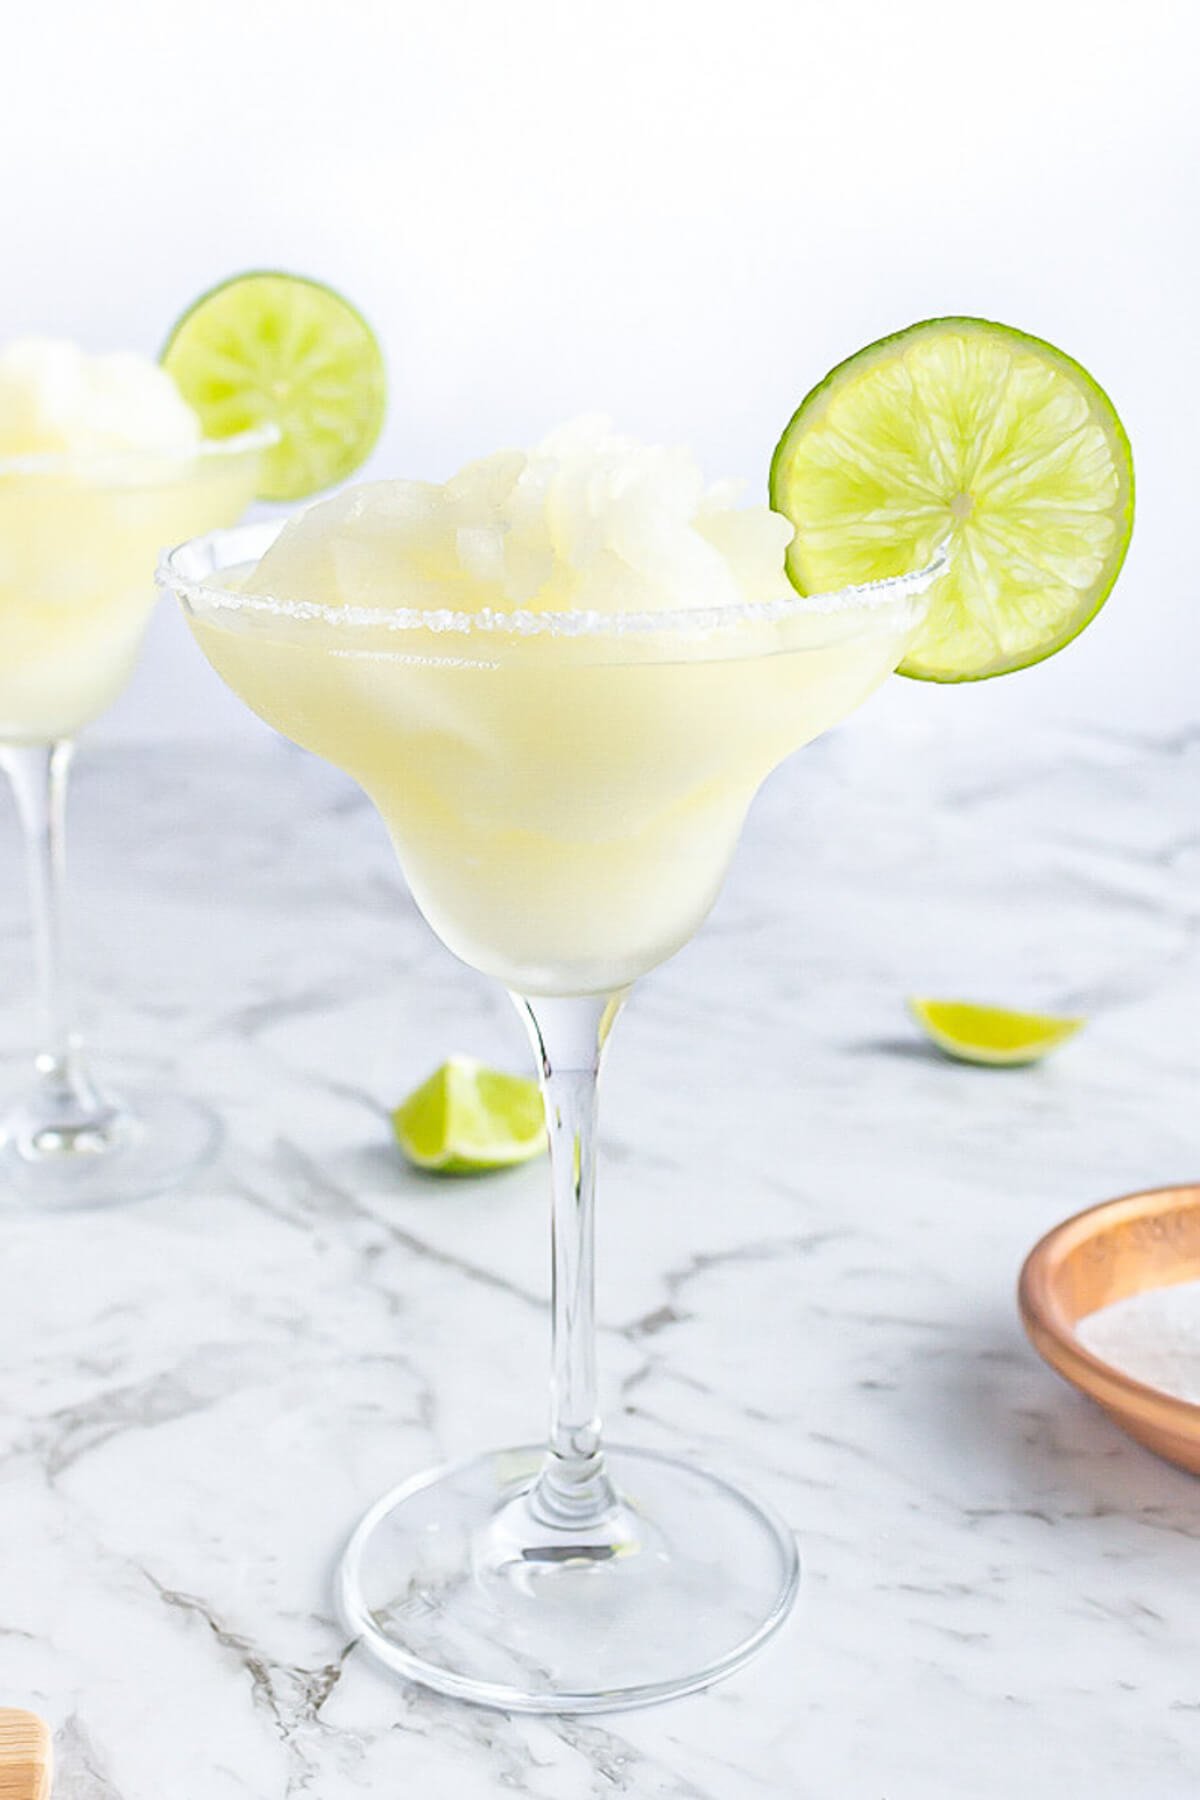 classic margarita glass filled with a frozen yellow slushie drink garnished with a lime wheel on a grey and white marble background.